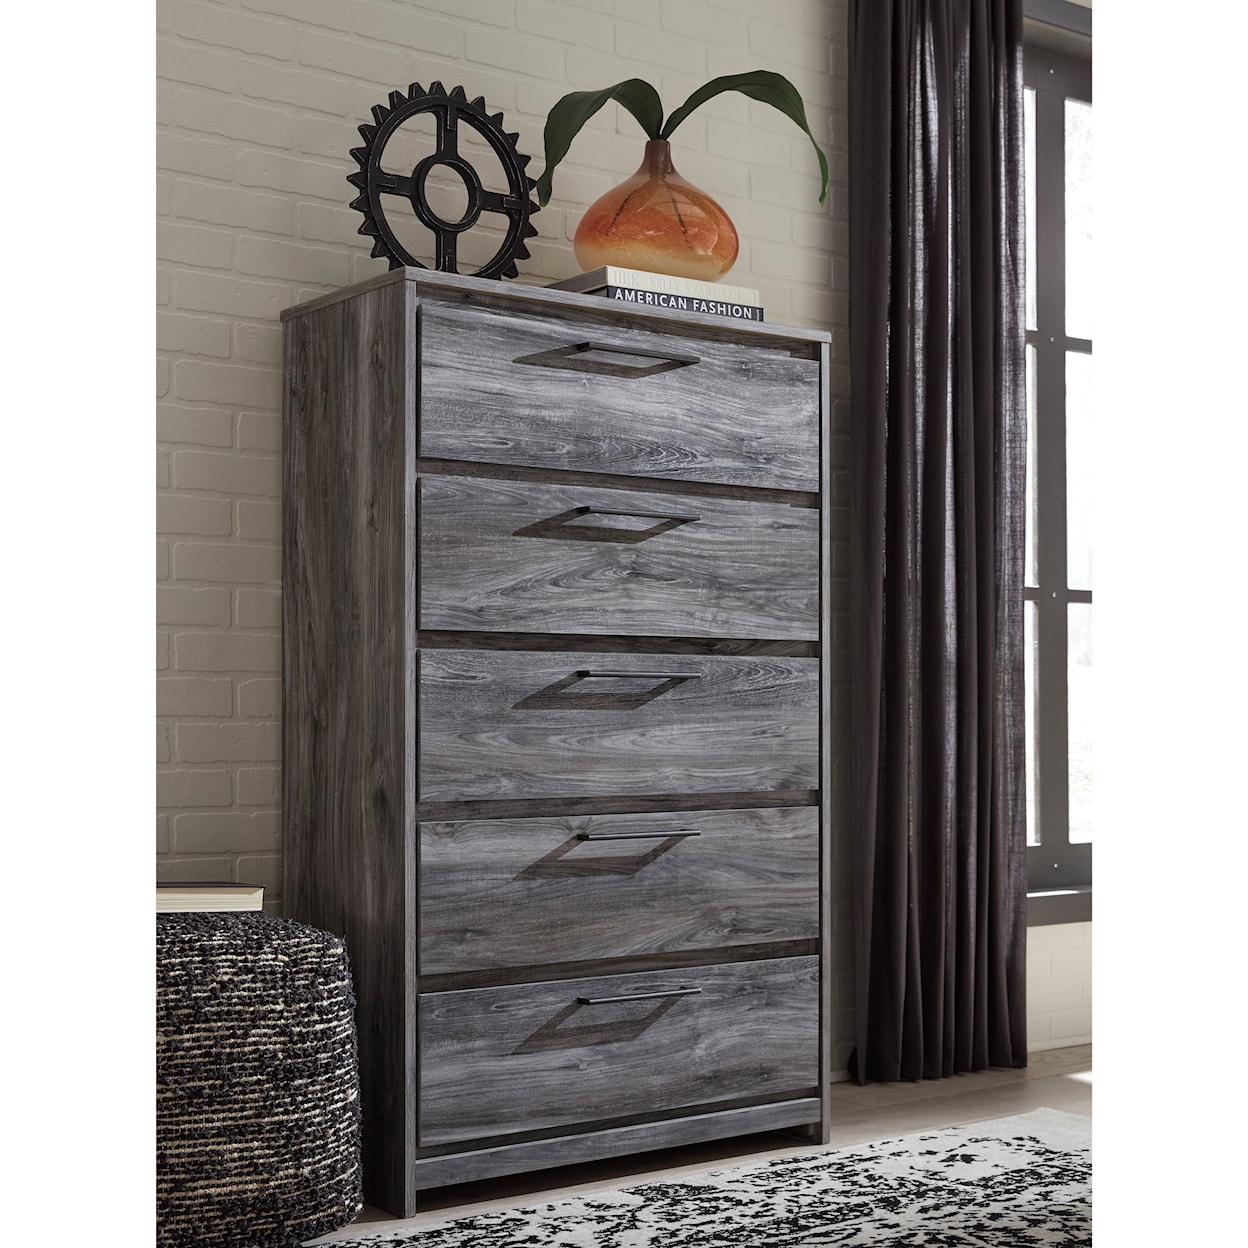 Ashley Furniture Signature Design Baystorm Chest of Drawers